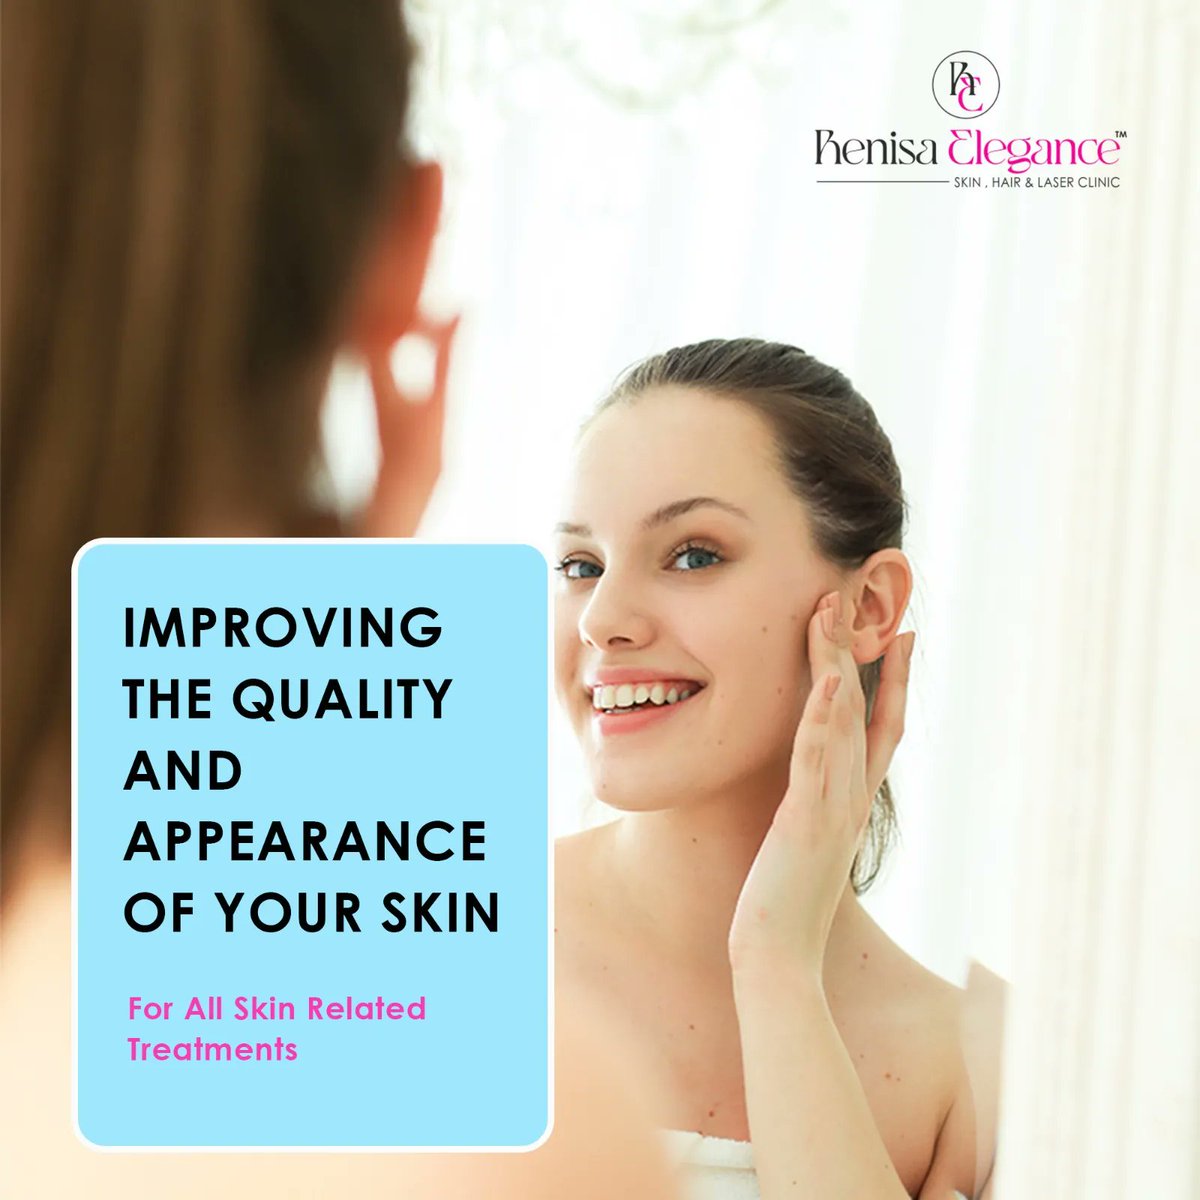 Elevate the quality and aesthetics of your skin with our comprehensive range of skin treatments. 

#RenisaElegance #SkinClinic #HairClinic #RevolutionaryTreatment #RadiantComplexion #RejuvenatedSkin #AdvancedSkincare #GlowingSkin #HealthySkin #PamperingExperience #SelfCare